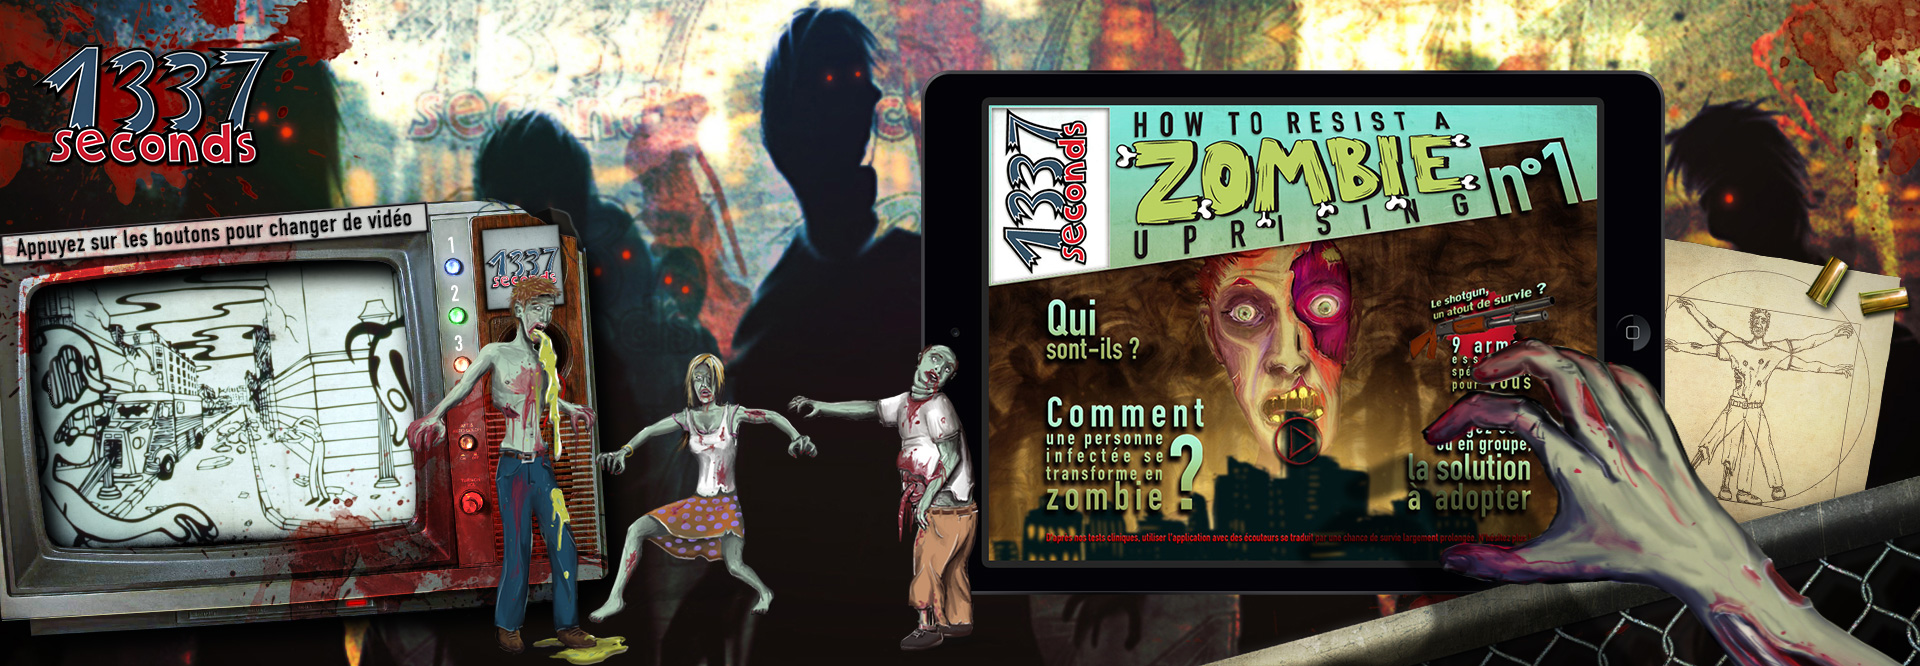 frontpage_gallery_zombies